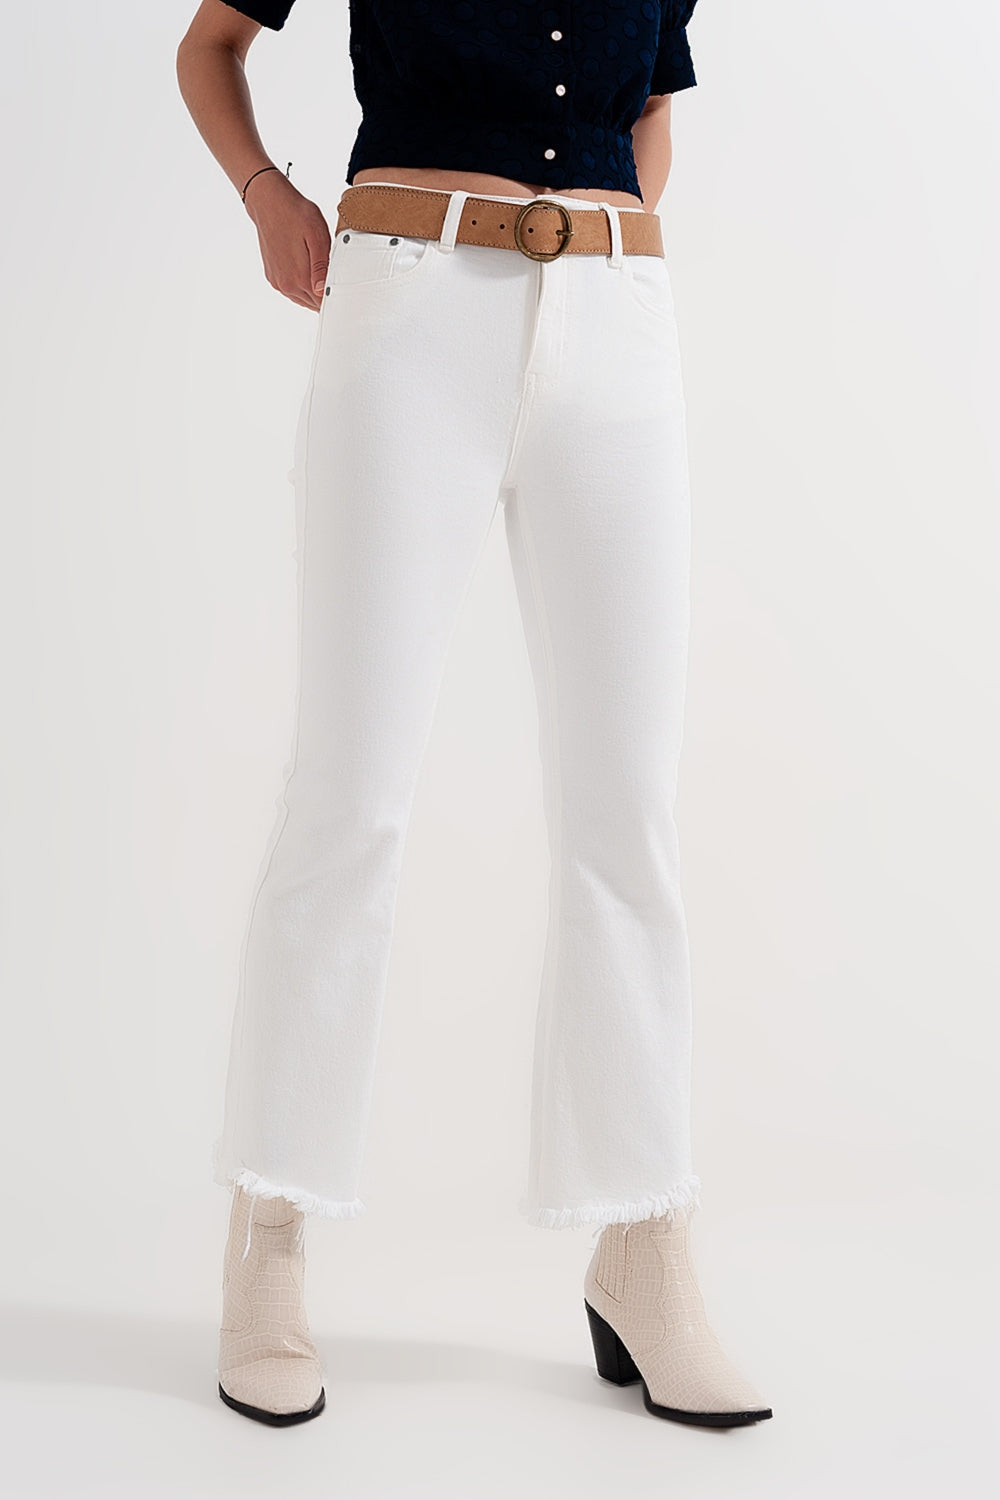 Rigid Cropped Flare Jeans in Cream With Raw Hem